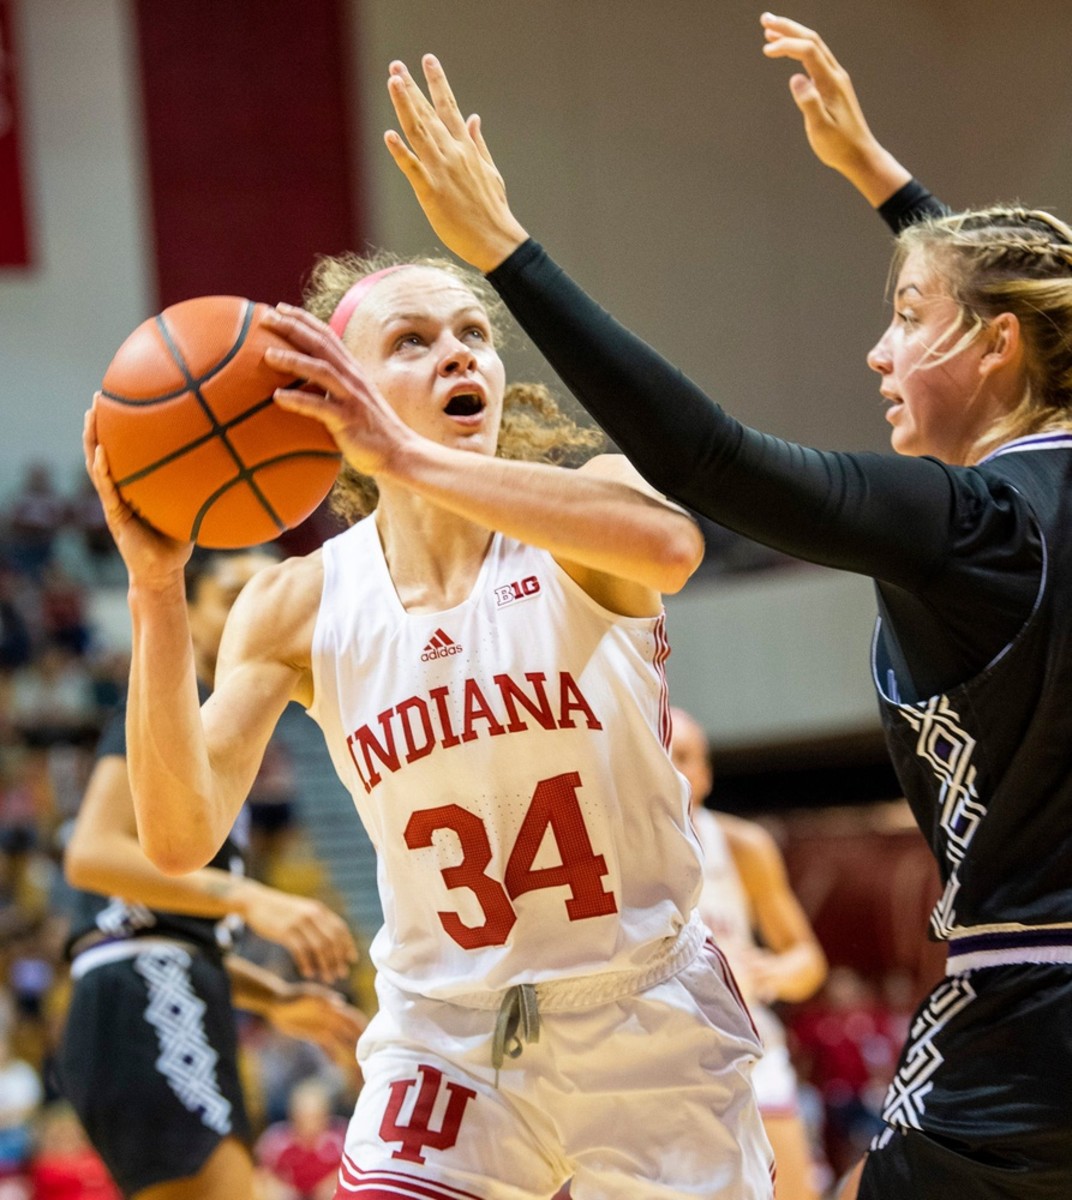 Indiana's Grace Berger (34) shoots during the Indiana versus Kentucky Wesleyan women's basketball game at Simon Skjodt Assembly Hall on Friday, Nov. 4, 2022.